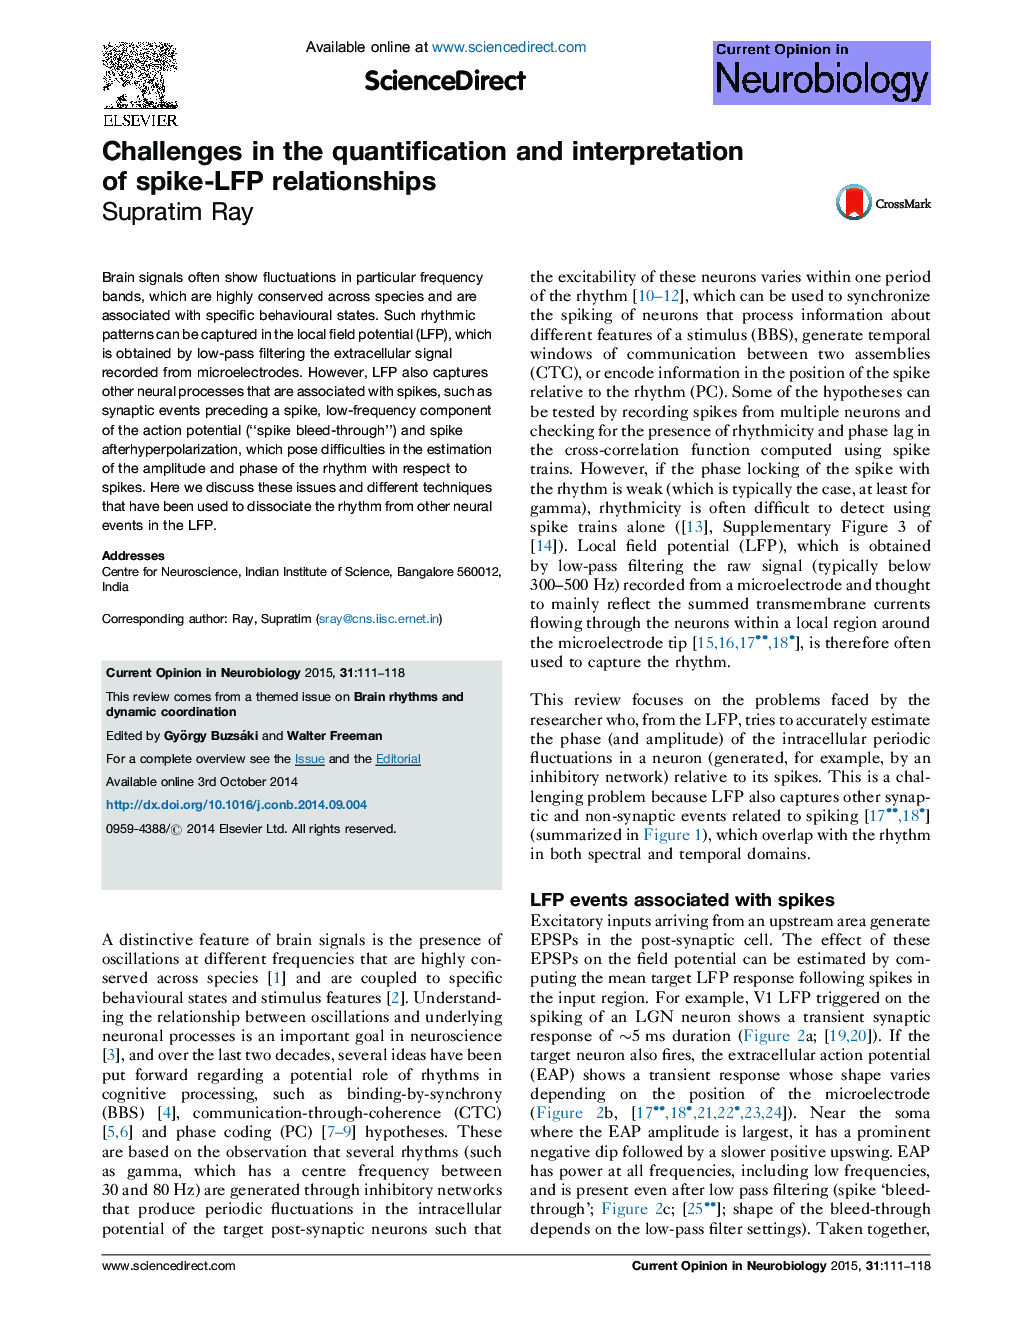 Challenges in the quantification and interpretation of spike-LFP relationships